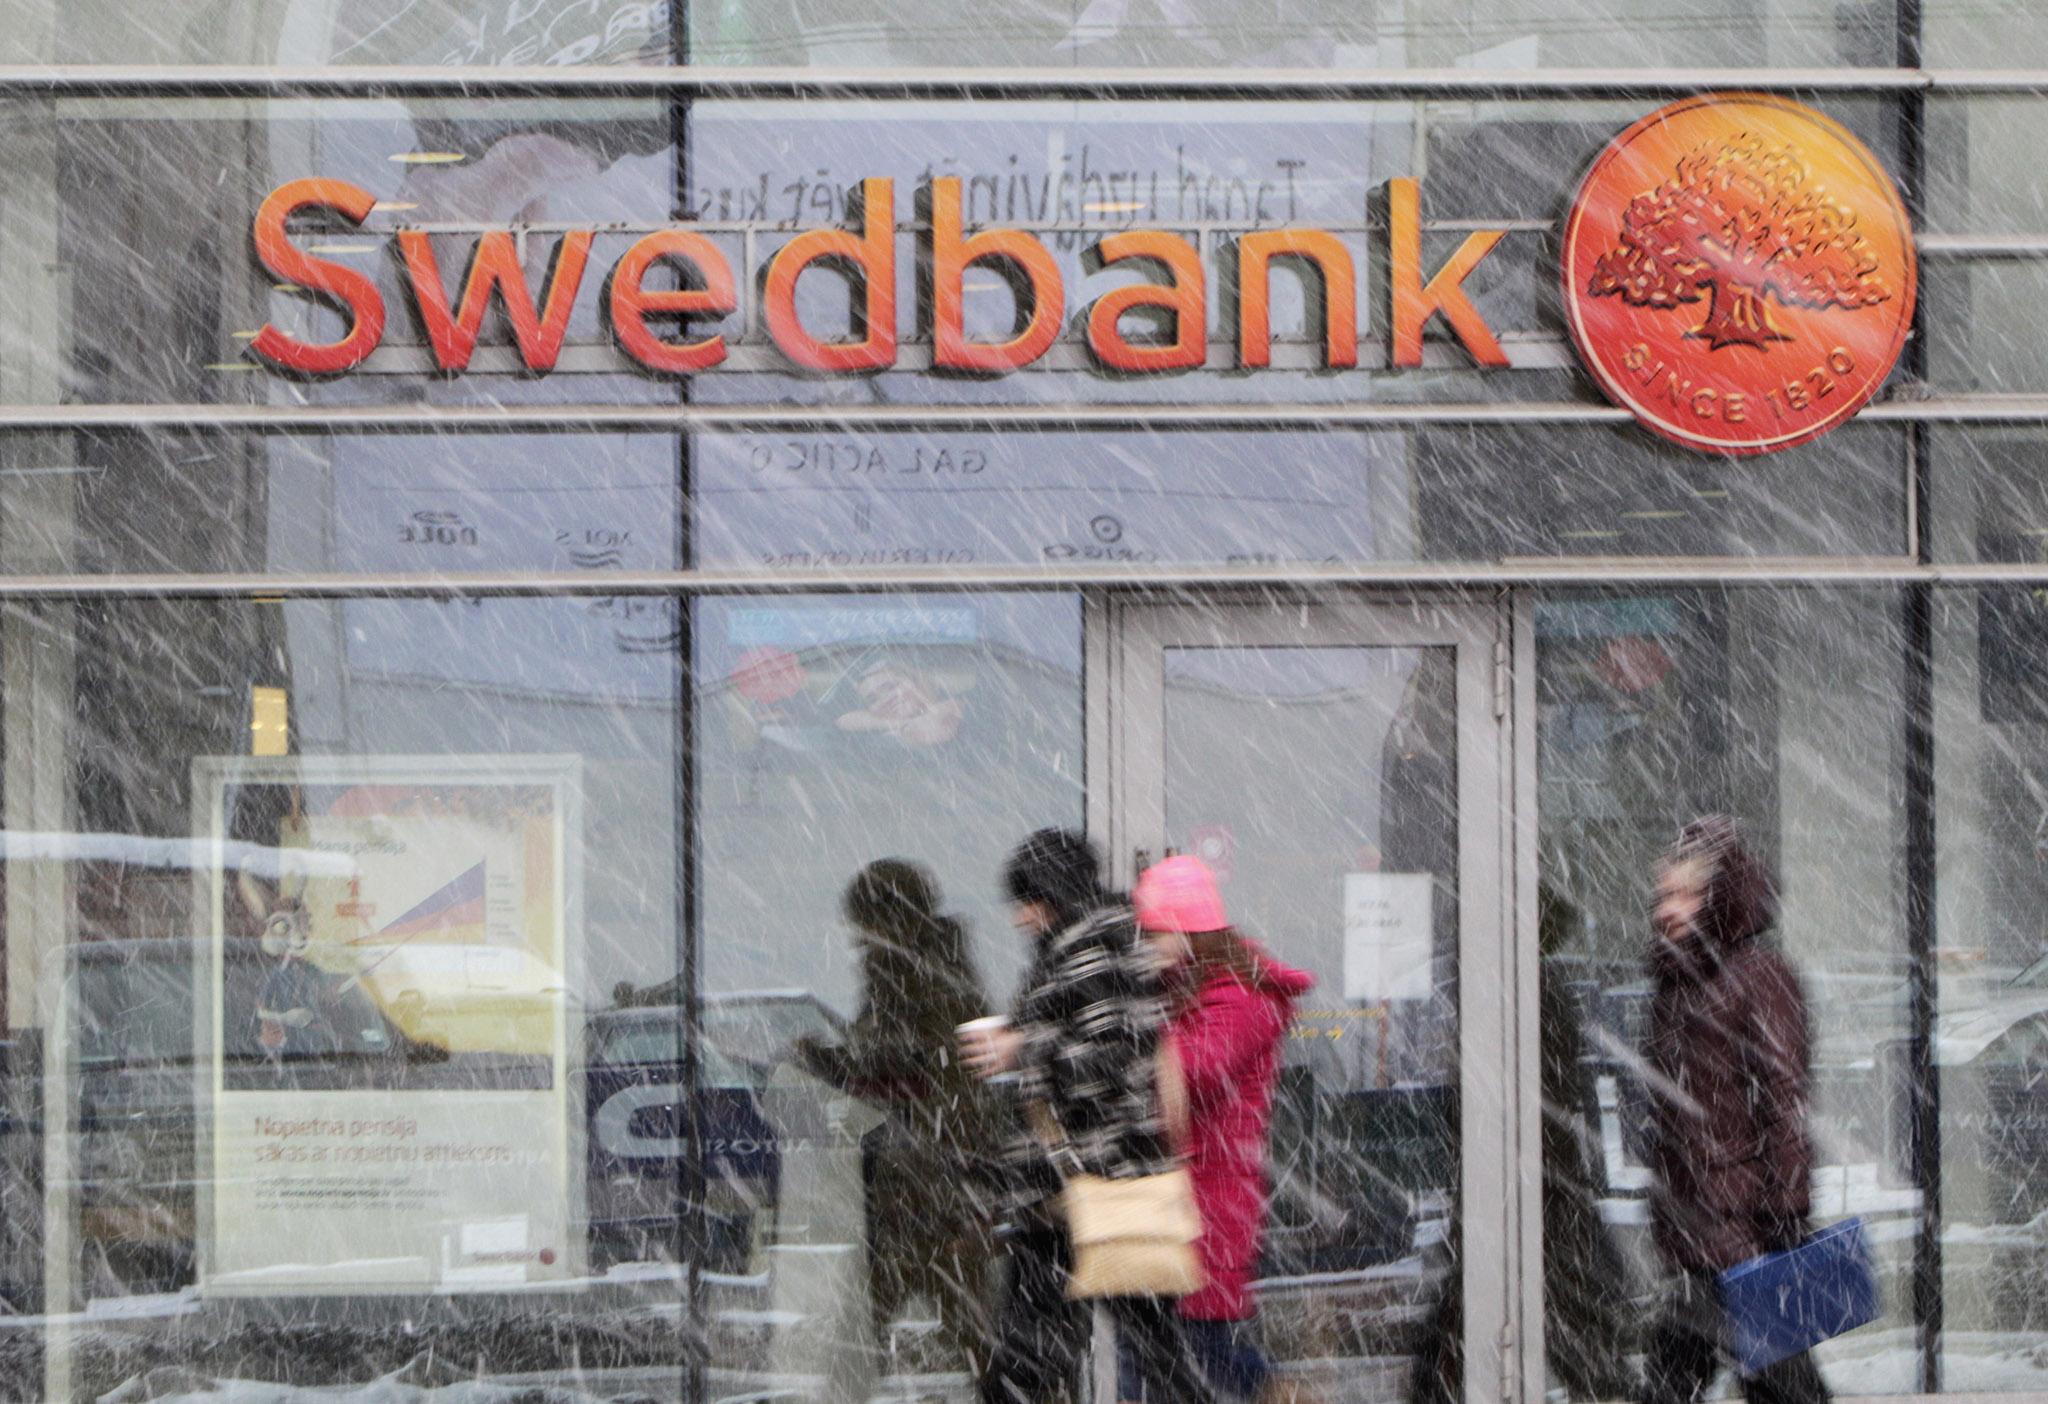 Swedbank already operates its chatbot Nina in Sweden and plans to roll it out to its Baltic markets